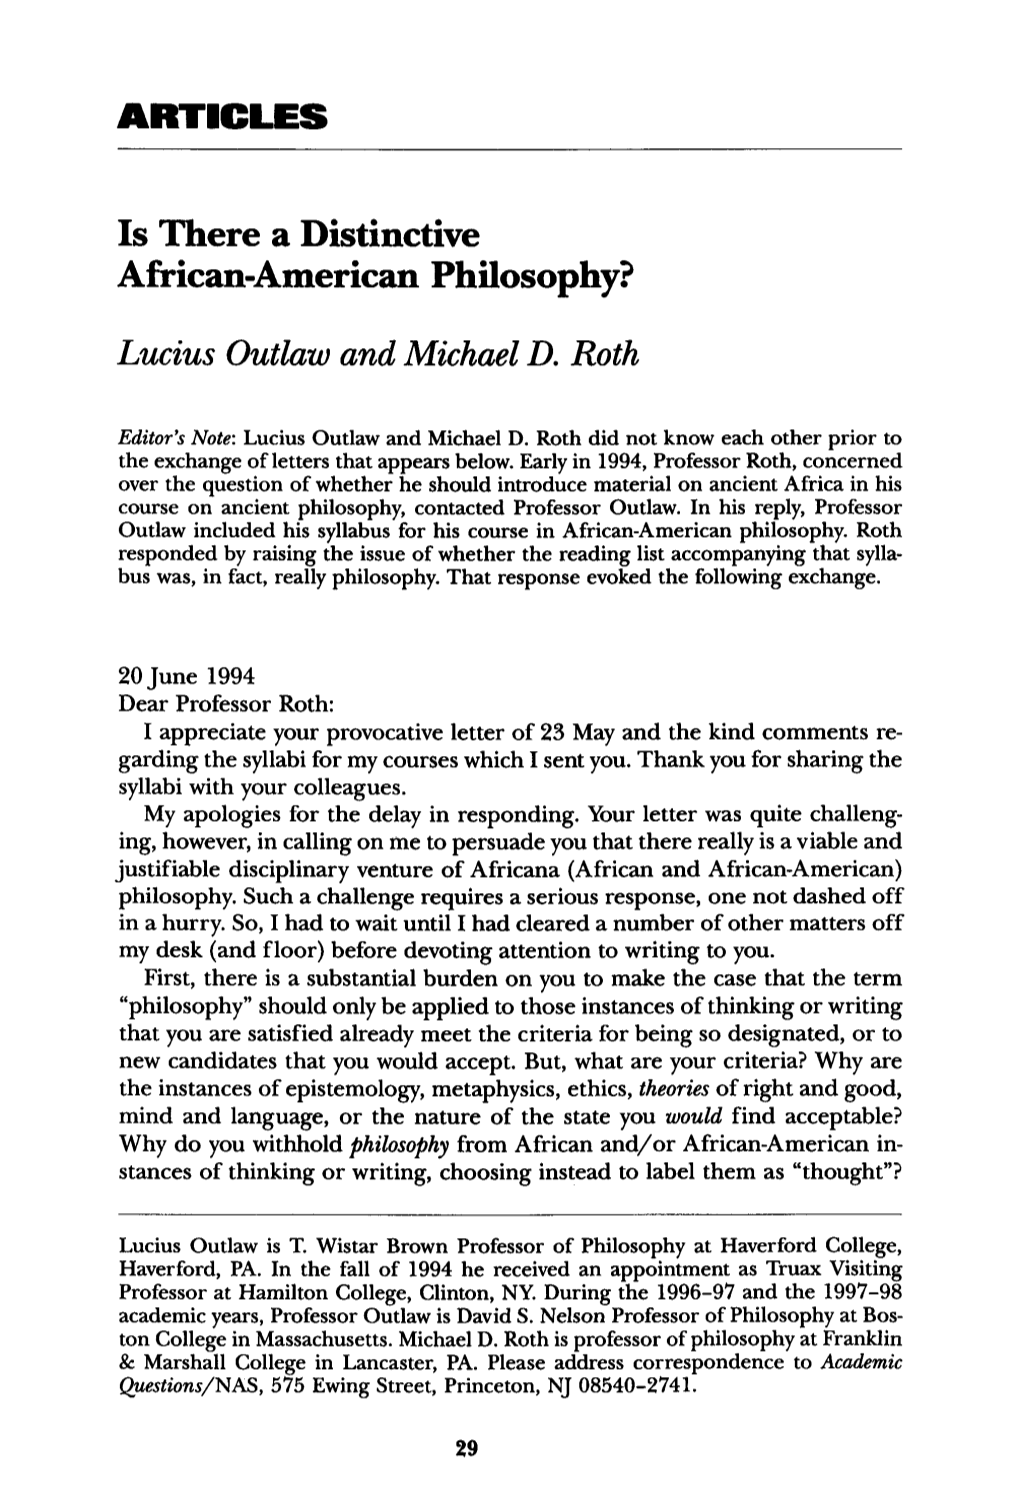 Is There a Distinctive African-American Philosophy?